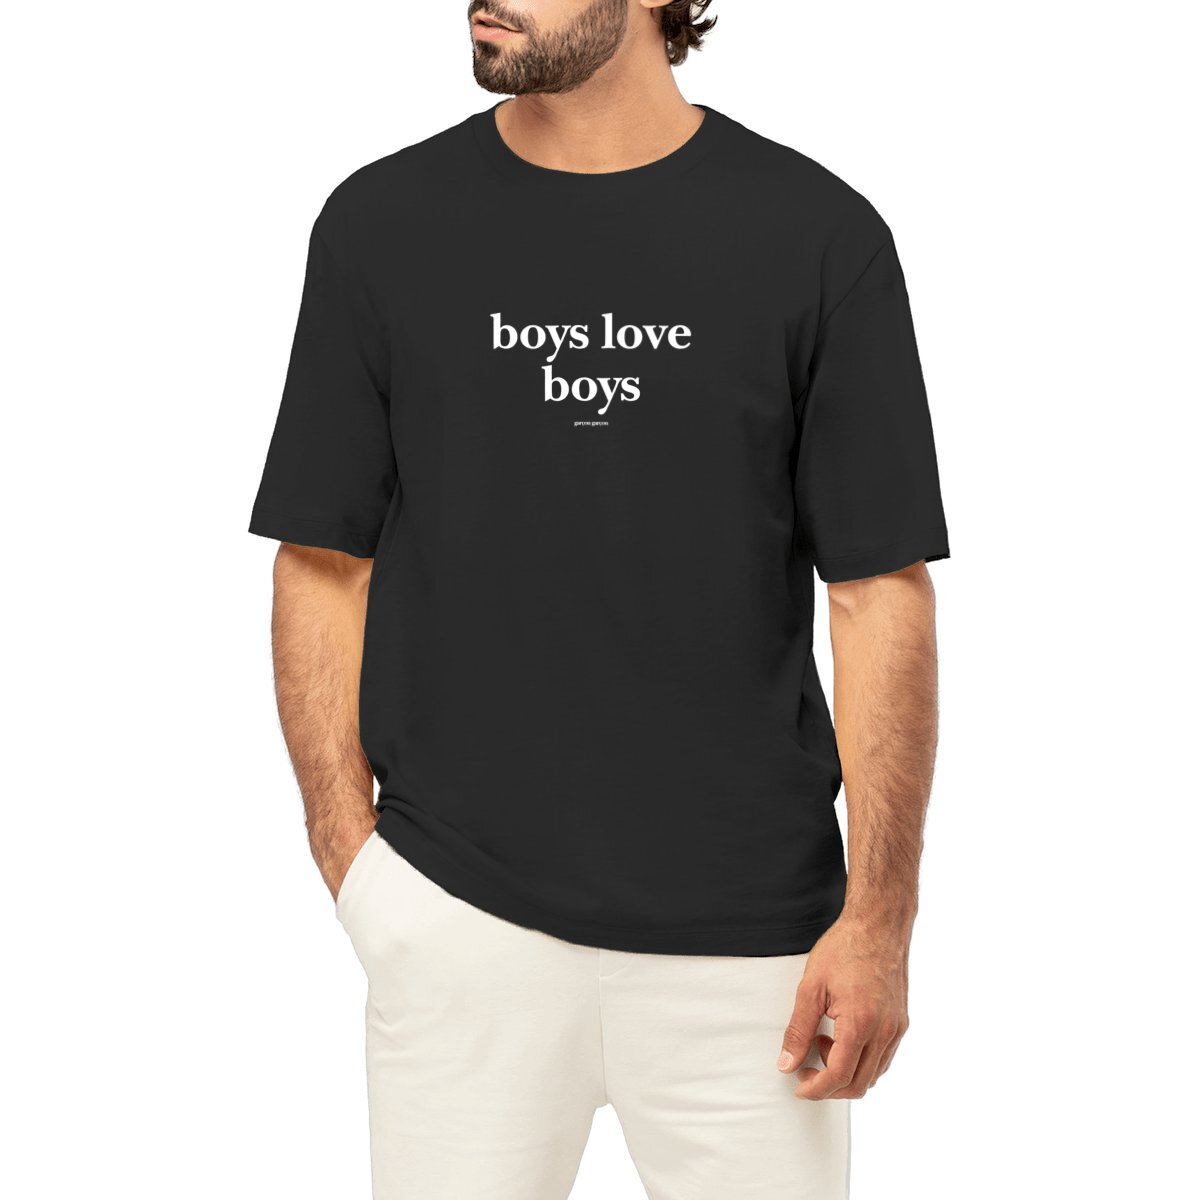 boys love boys tee oversized. garçon garçon tee oversize BLACK. Dive into the essence of Parisian cool with this oversized tee. The subtle 'garçon garçon' signature whispers a chic narrative, offering a slice of the city's famed elegance. Perfect for those who speak style with simplicity.